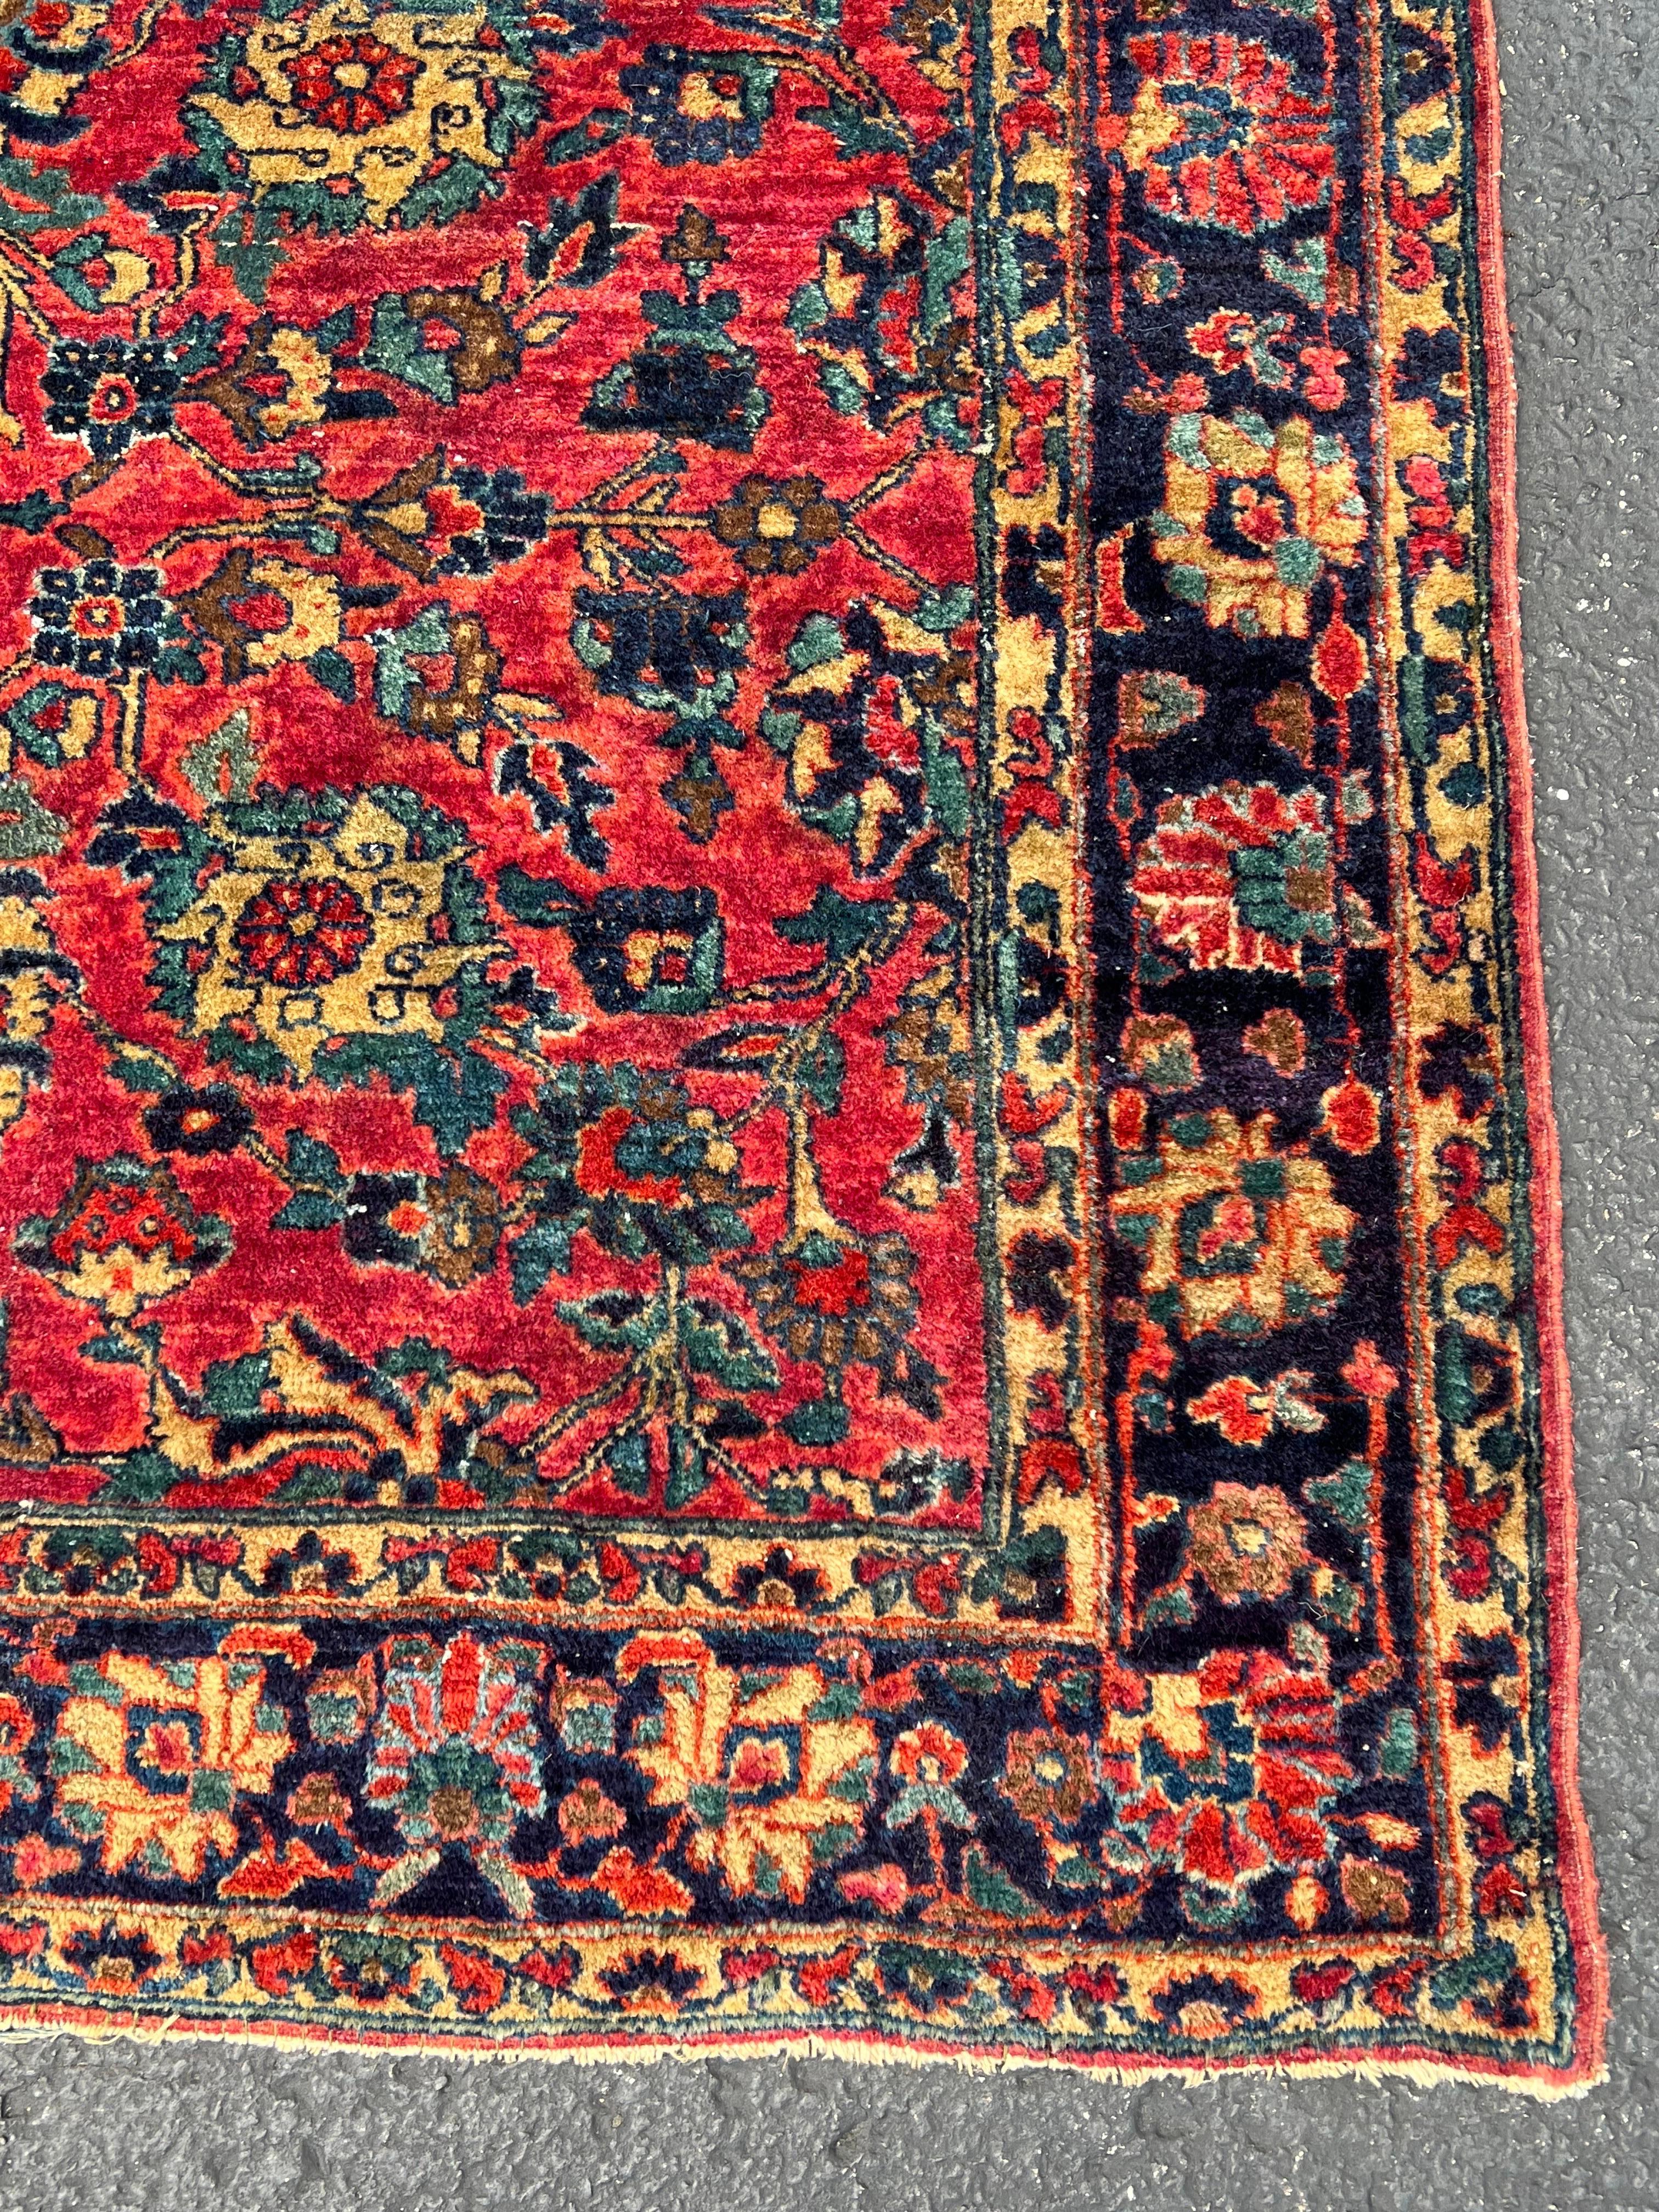 Wool Vegetable Dyed Mid 20th Century Persian Rug 5' x 7' For Sale